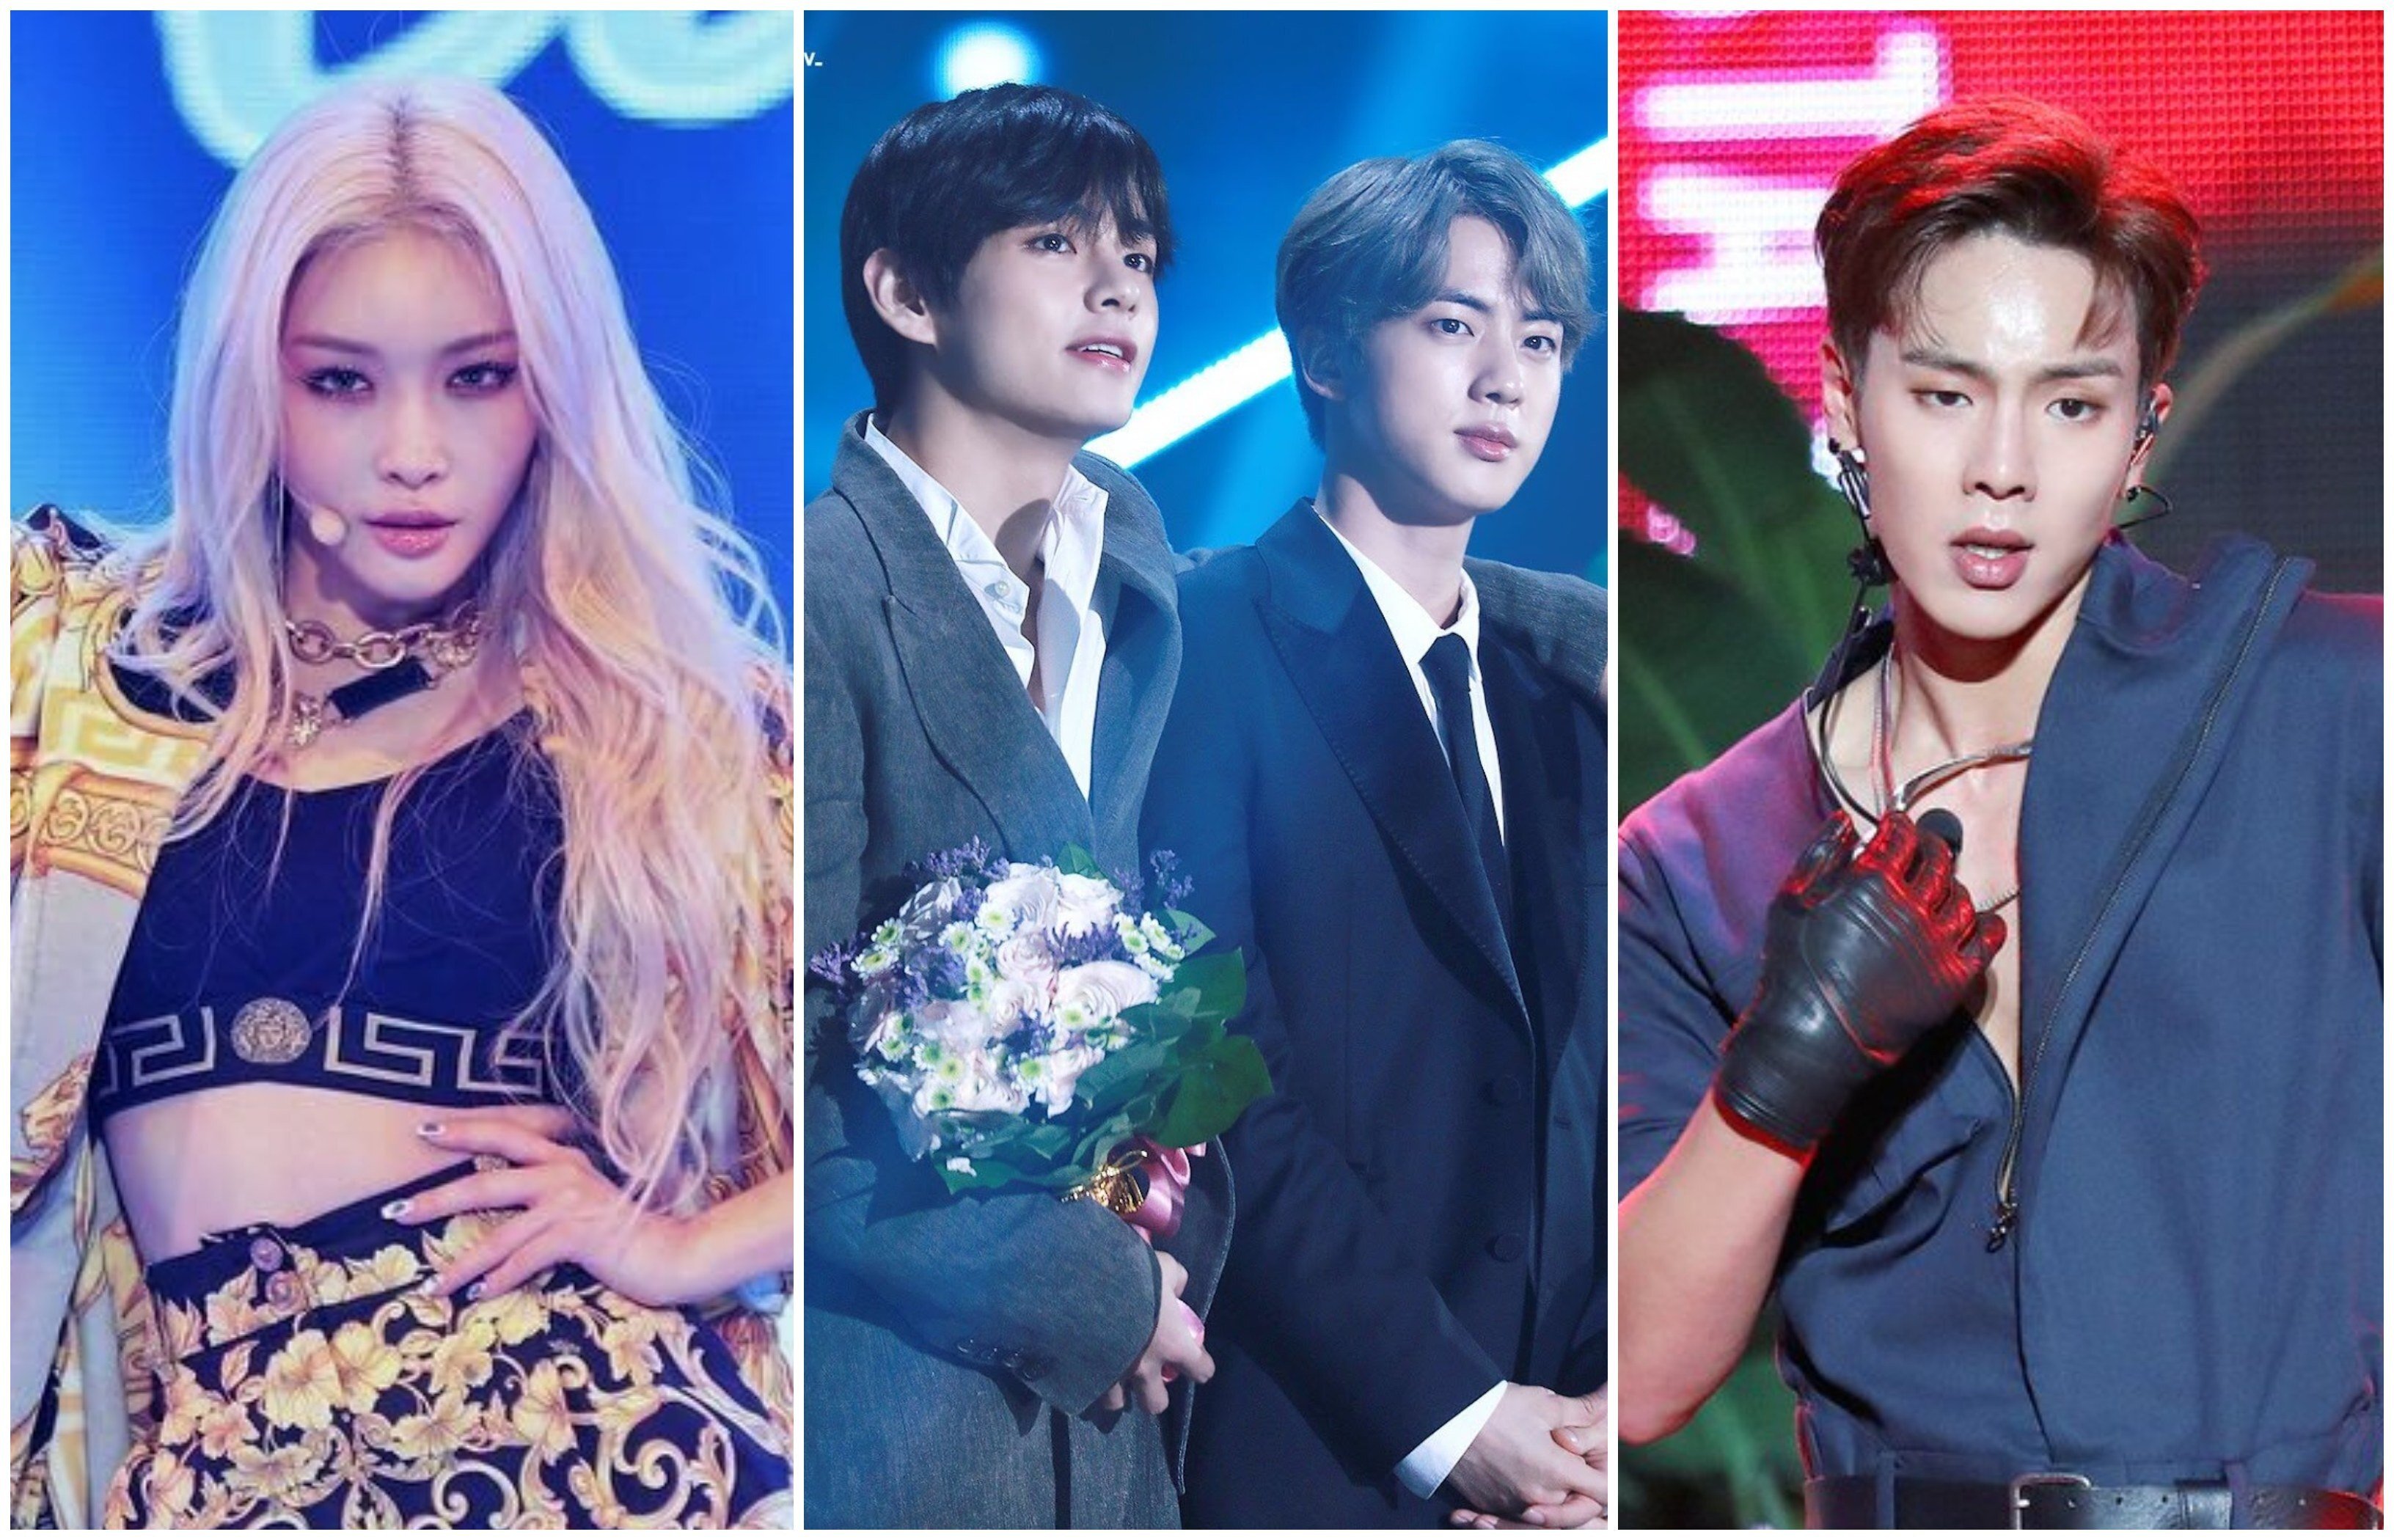 From Chungha to BTS members, these K-pop superstars got their start as backup dancers. 
Photos: MBC, @Baby_V_V_/Twitter